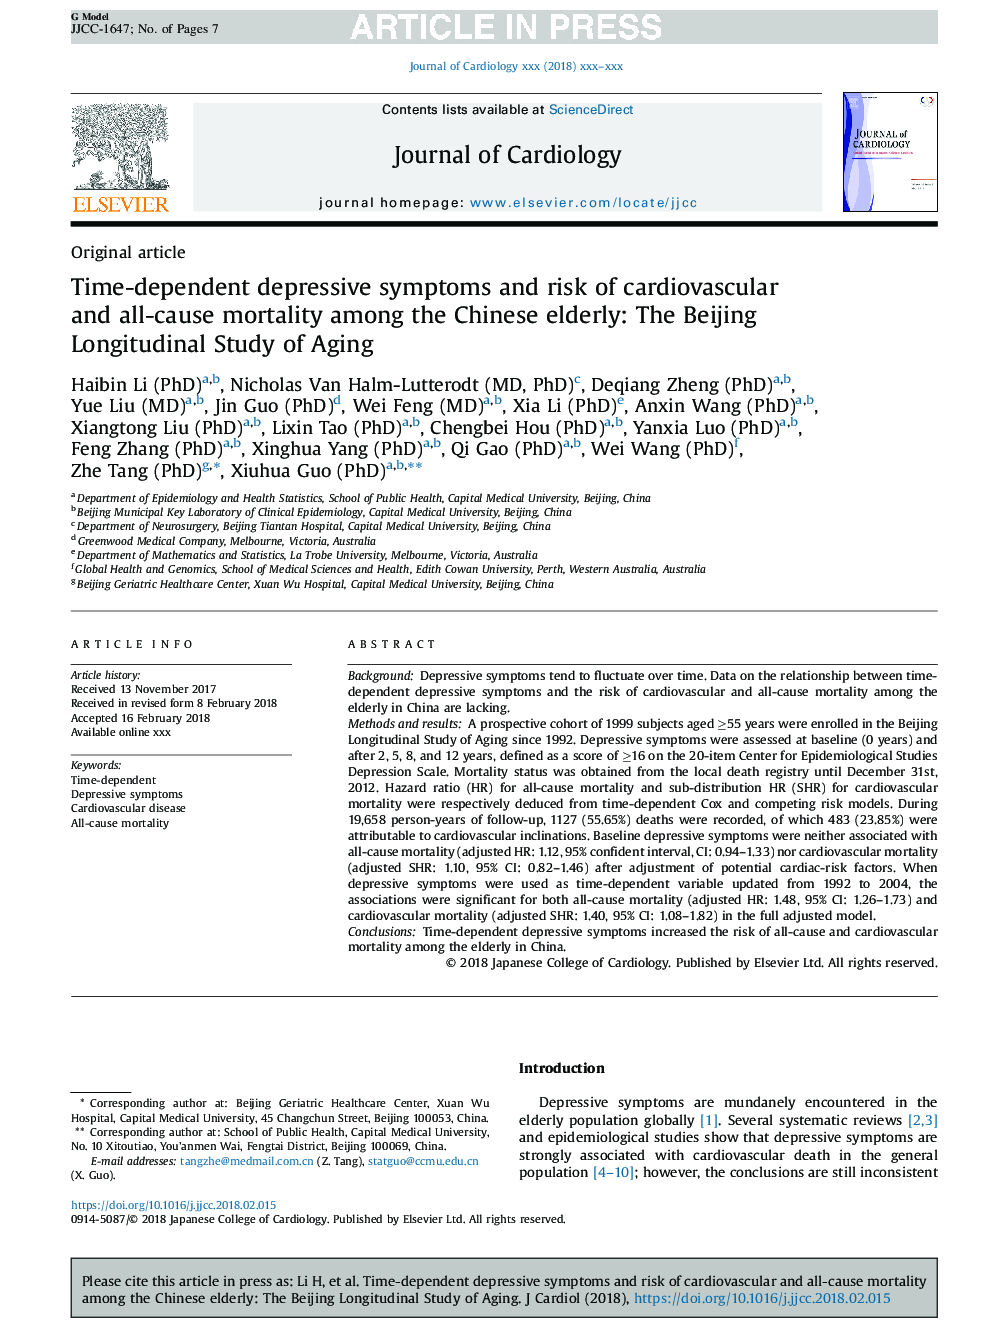 Time-dependent depressive symptoms and risk of cardiovascular and all-cause mortality among the Chinese elderly: The Beijing Longitudinal Study of Aging